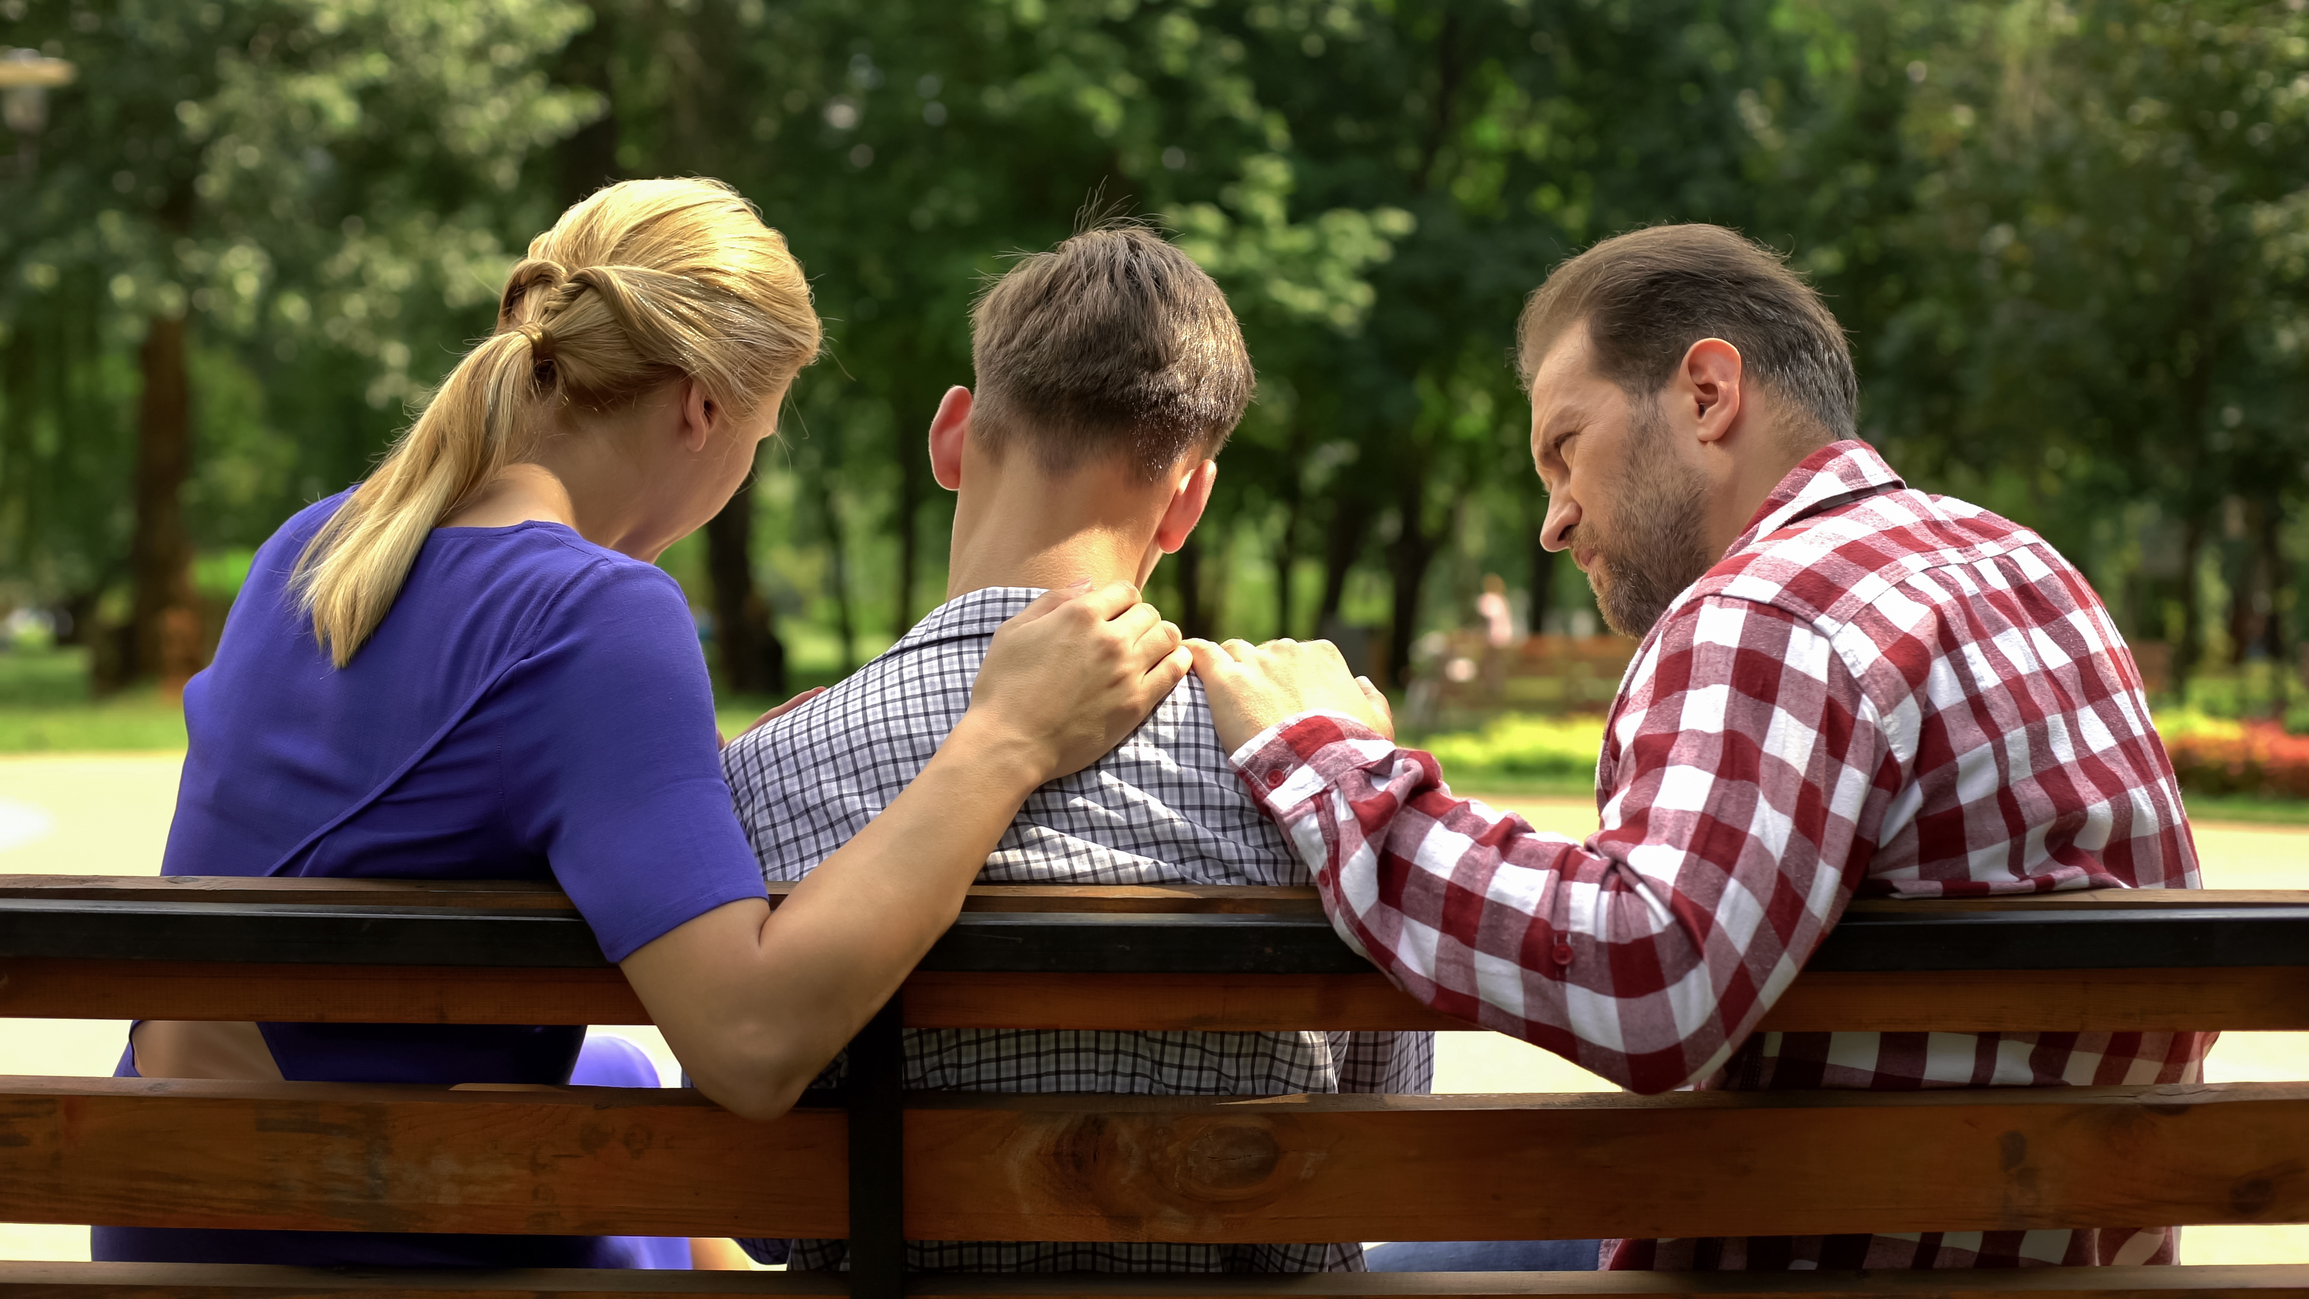 concerned family parents on park bench talking to young adult